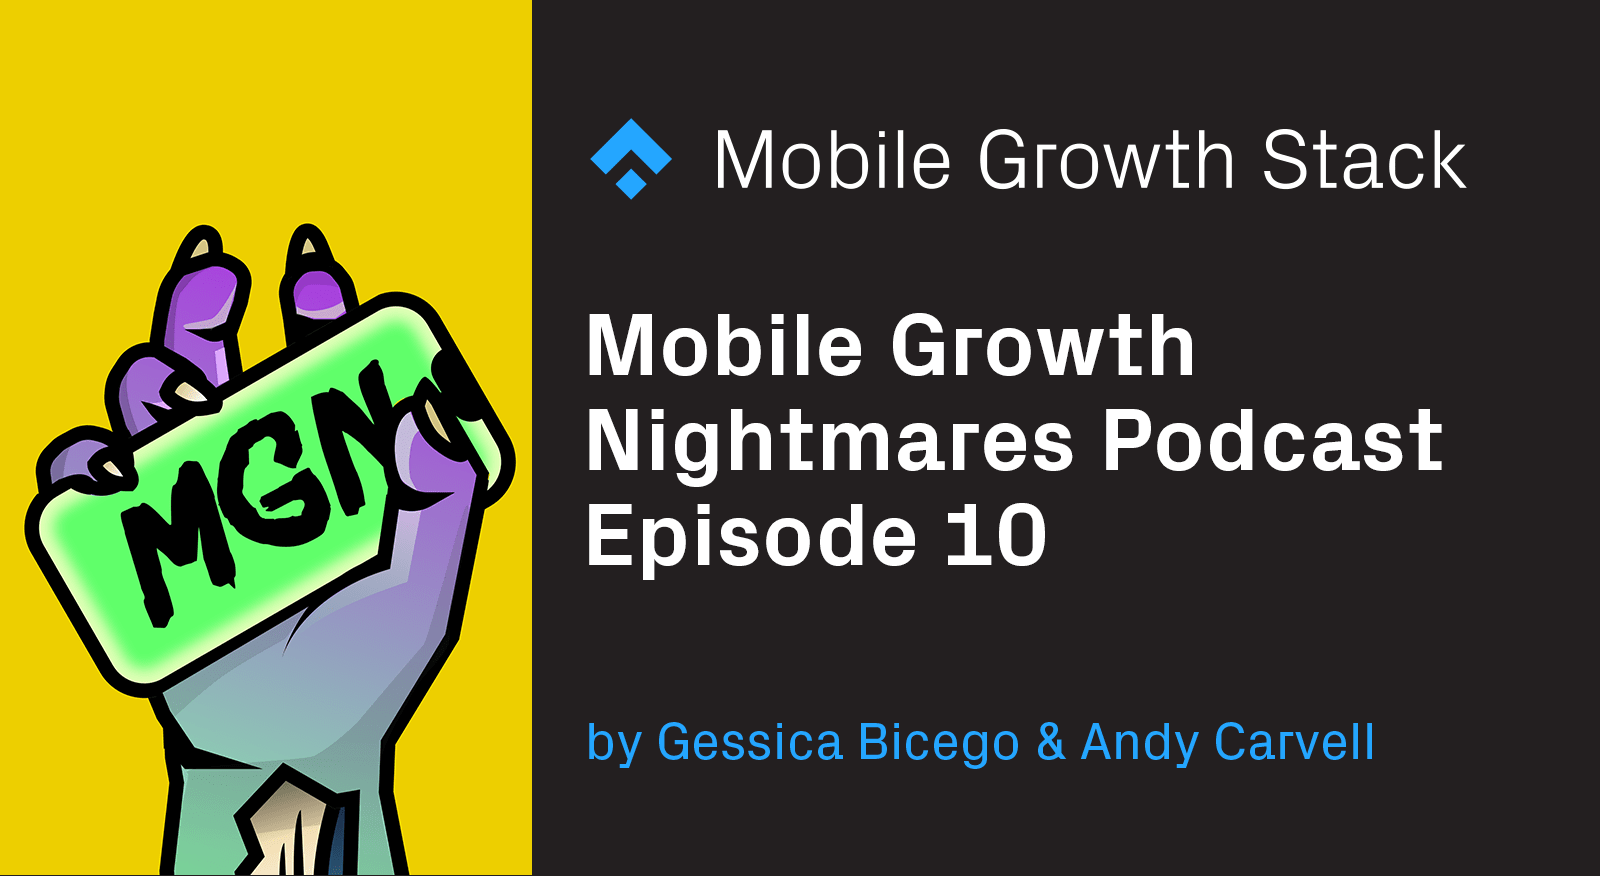 Mobile Growth Nightmares Podcast Episode 10